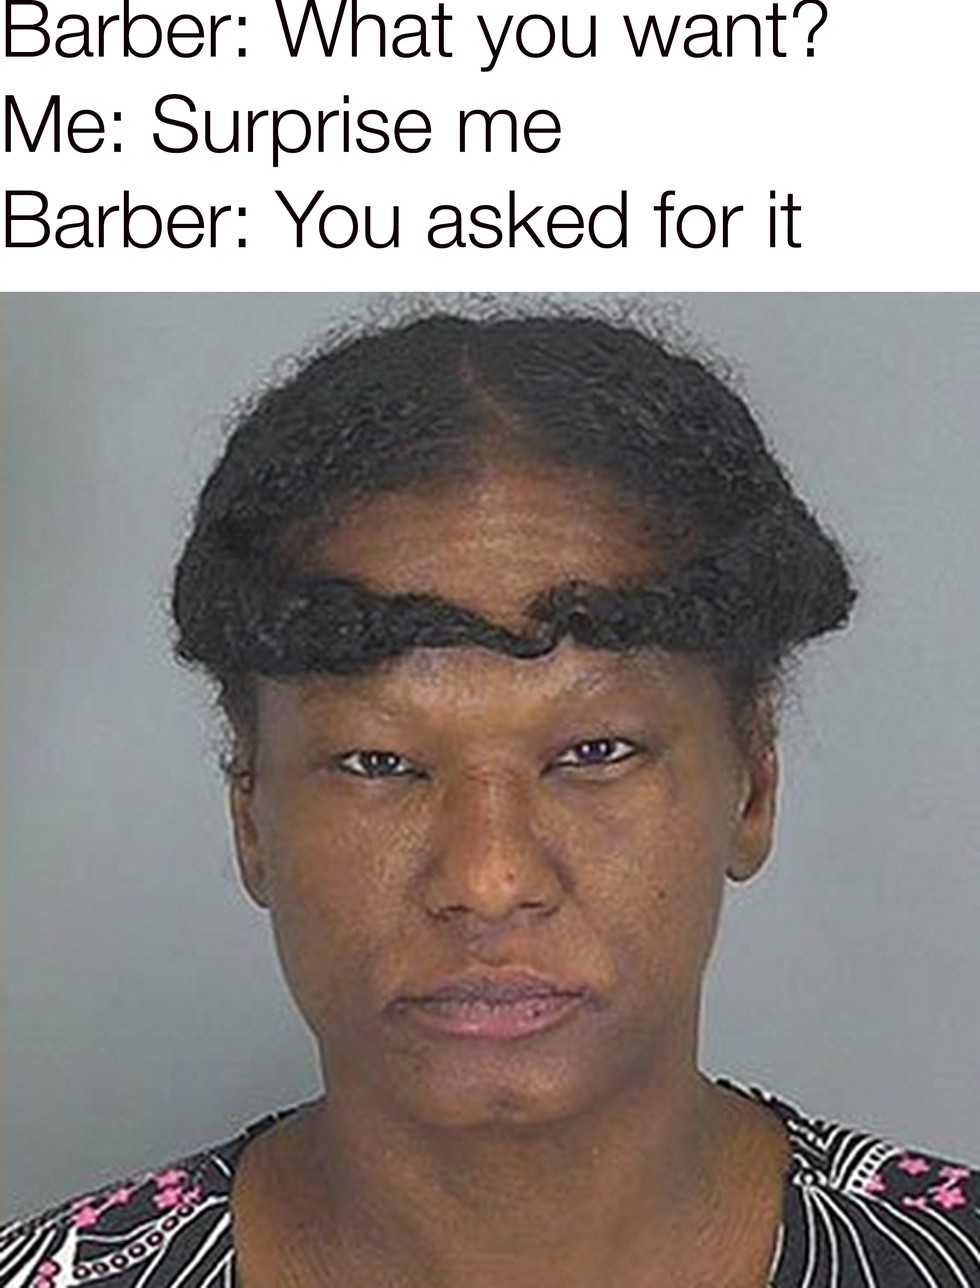 messed up haircuts - Barber What you want? Me Surprise me Barber You asked for it